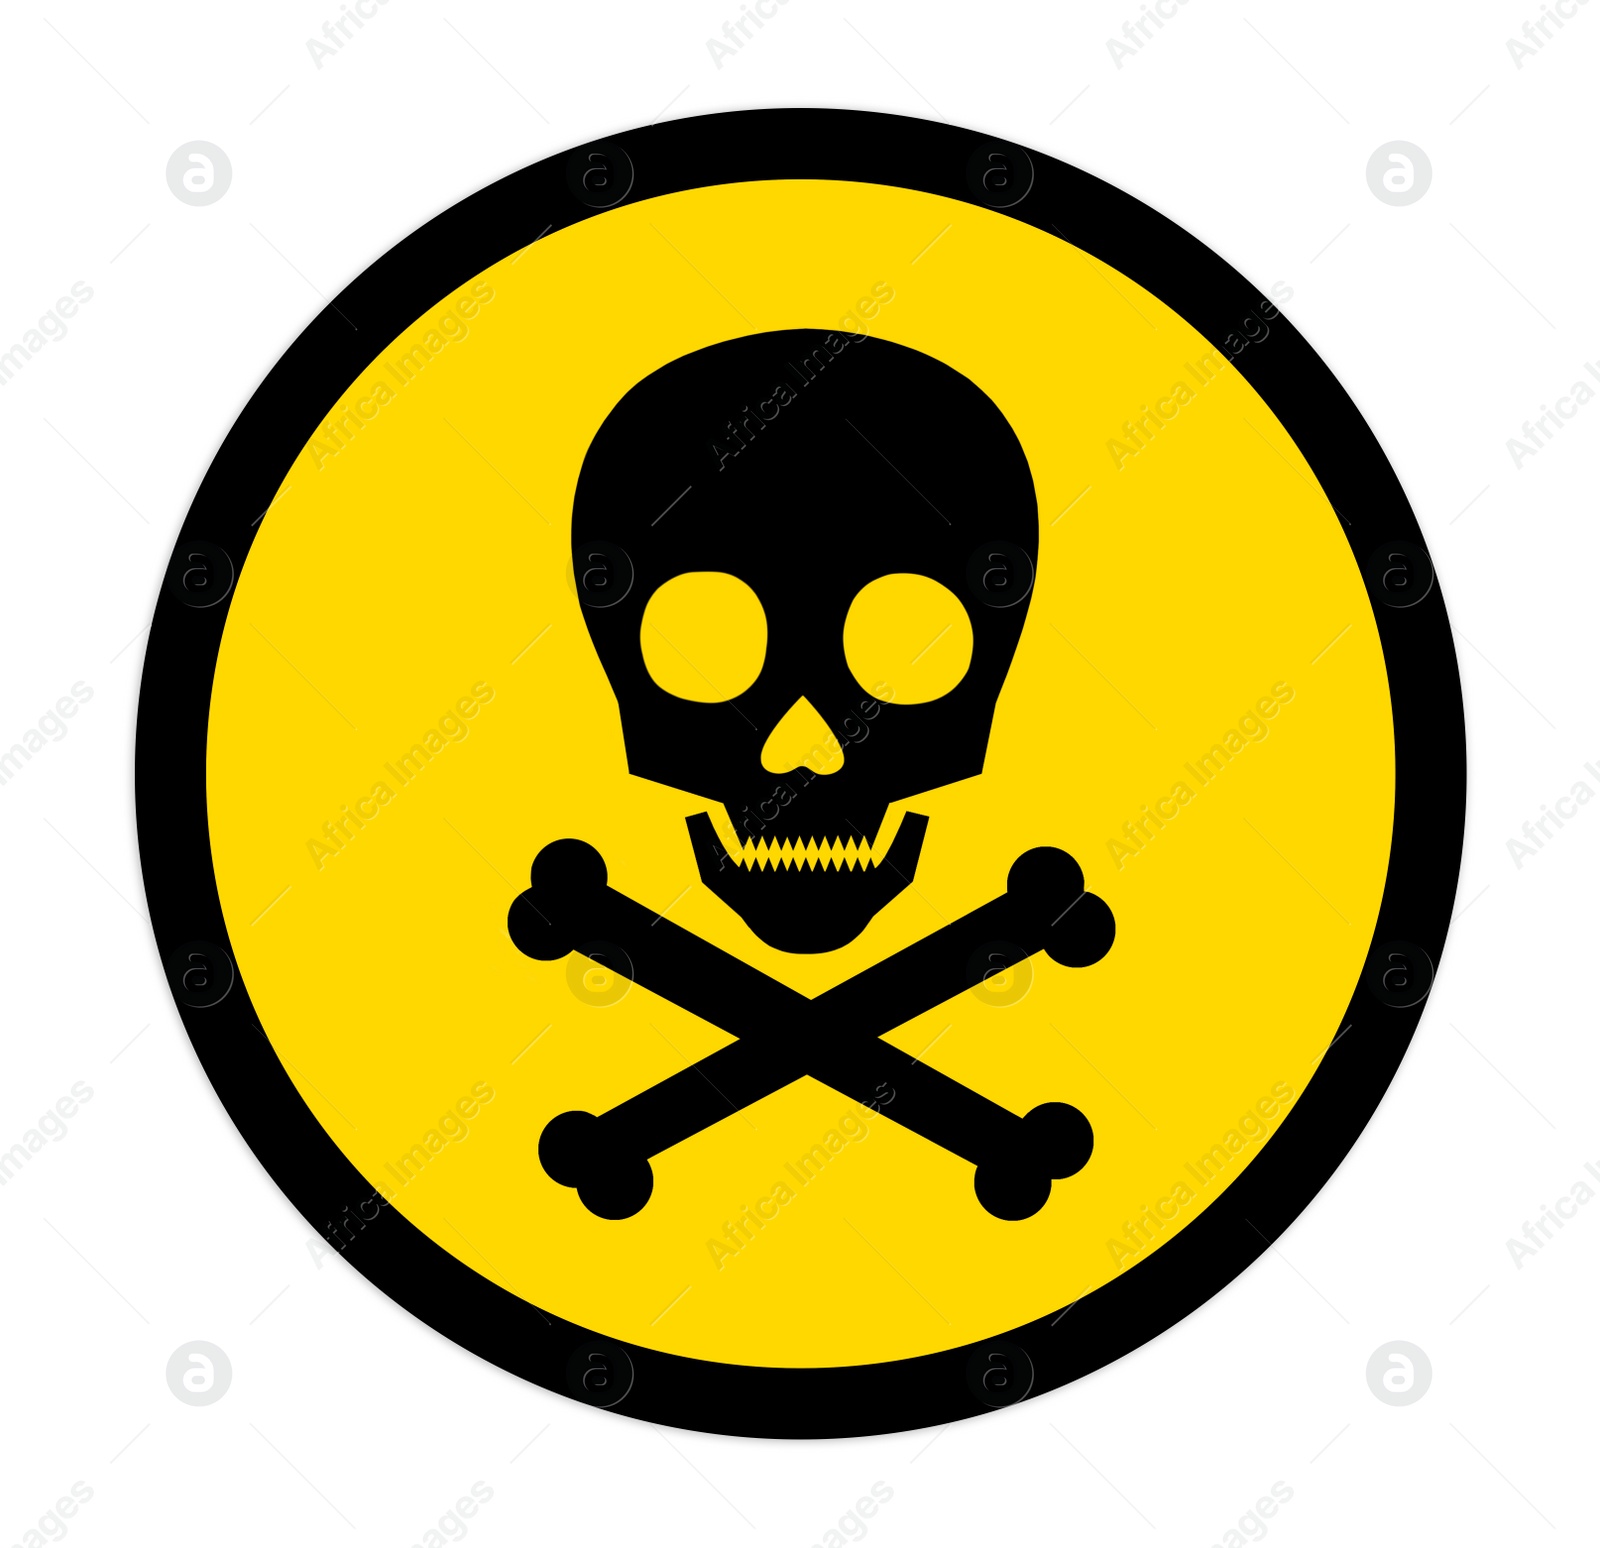 Illustration of Skull and crossbones in yellow circle on white background as warning symbol